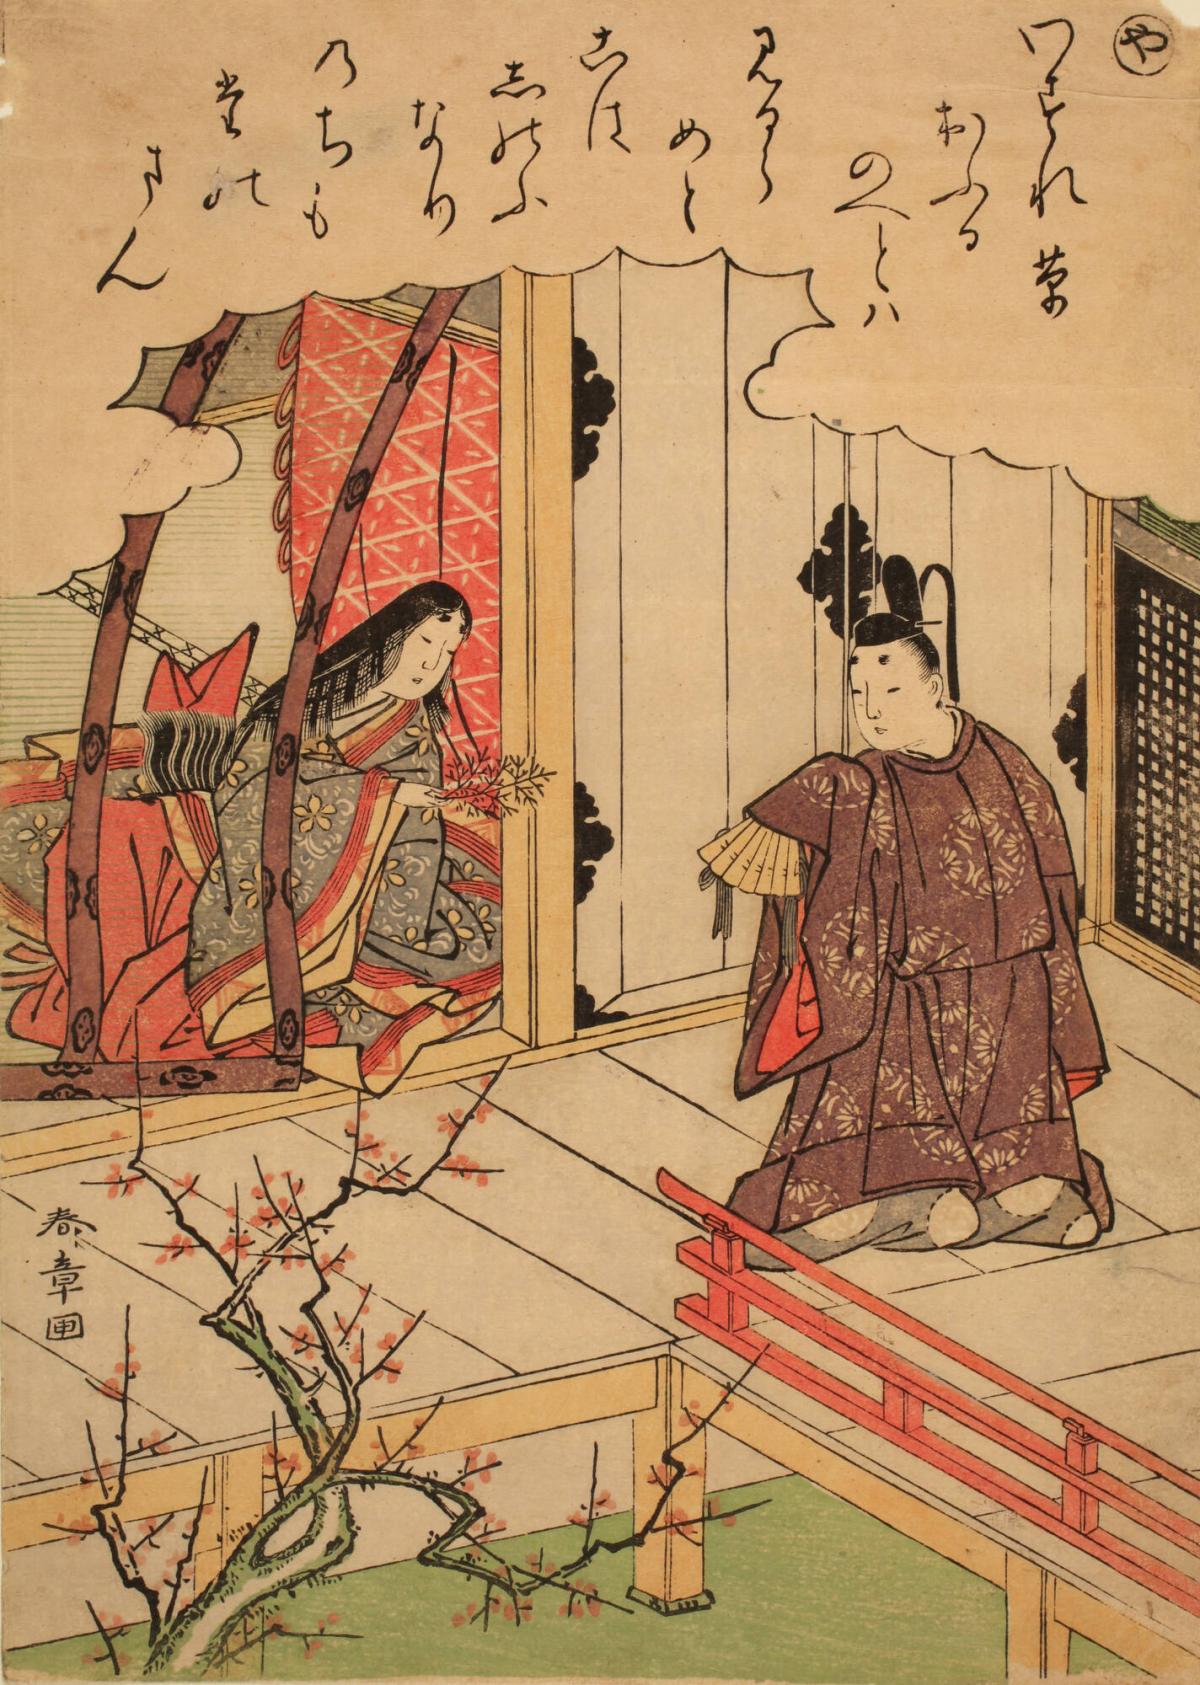 Lady Offering "Forgetful Grass" to a Courier, no. 29 from an untitled series of illustrations from Tales of Ise